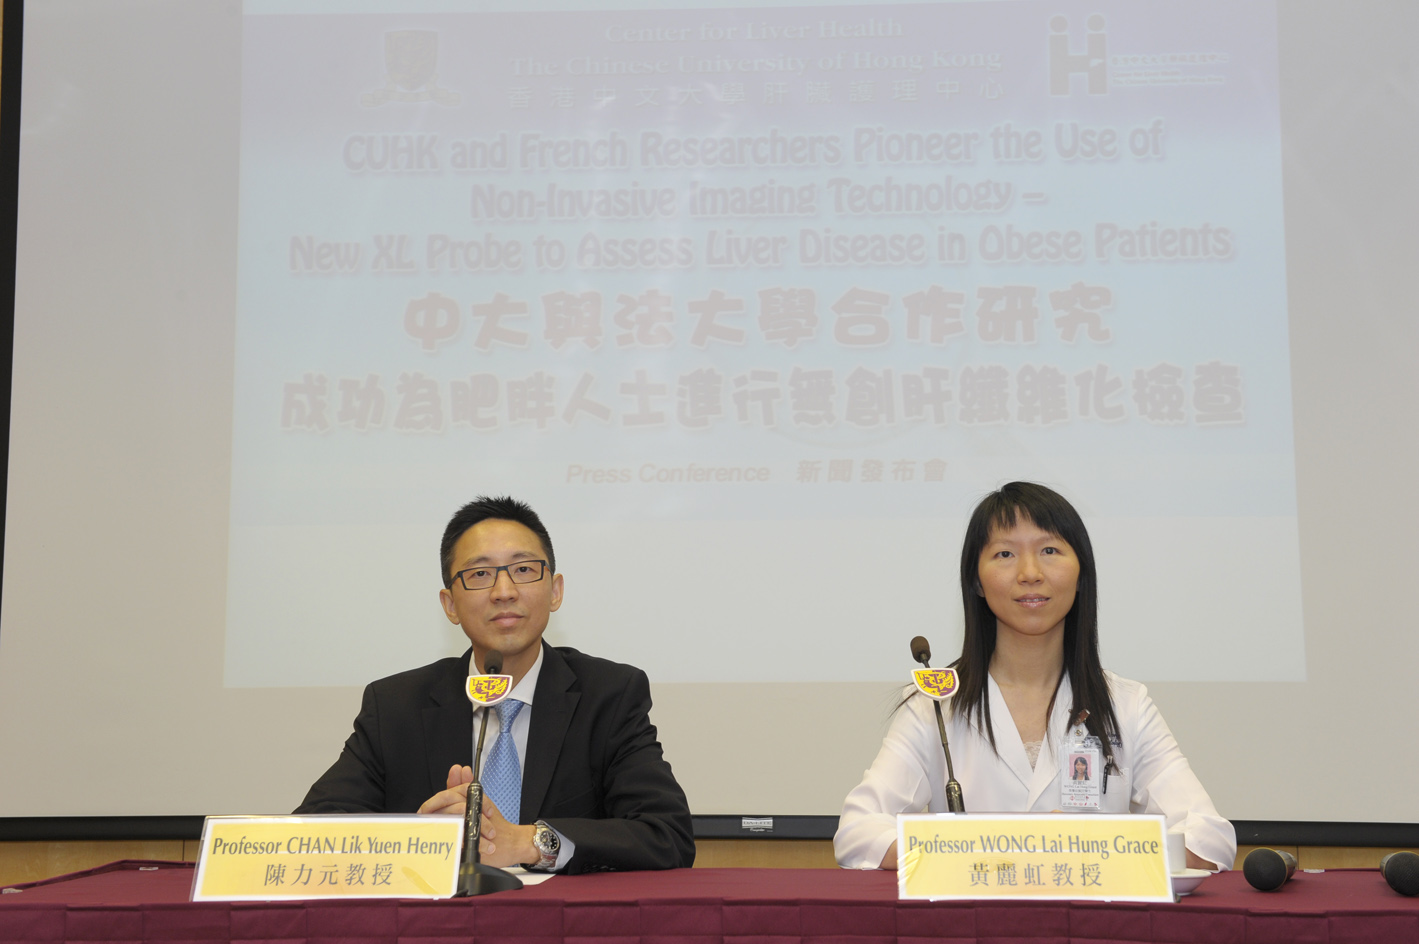 From left: Prof. Chan Lik Yuen Henry, Professor, Department of Medicine and Therapeutics and Director of Center for Liver Health; and Prof. Wong Lai Hung Grace, Associate Professor, Department of Medicine and Therapeutics at CUHK present their recent research on the use of non-invasive imaging technology - new XL probe in assessment of liver fibrosis among obese patients to obtain a more accurate imaging